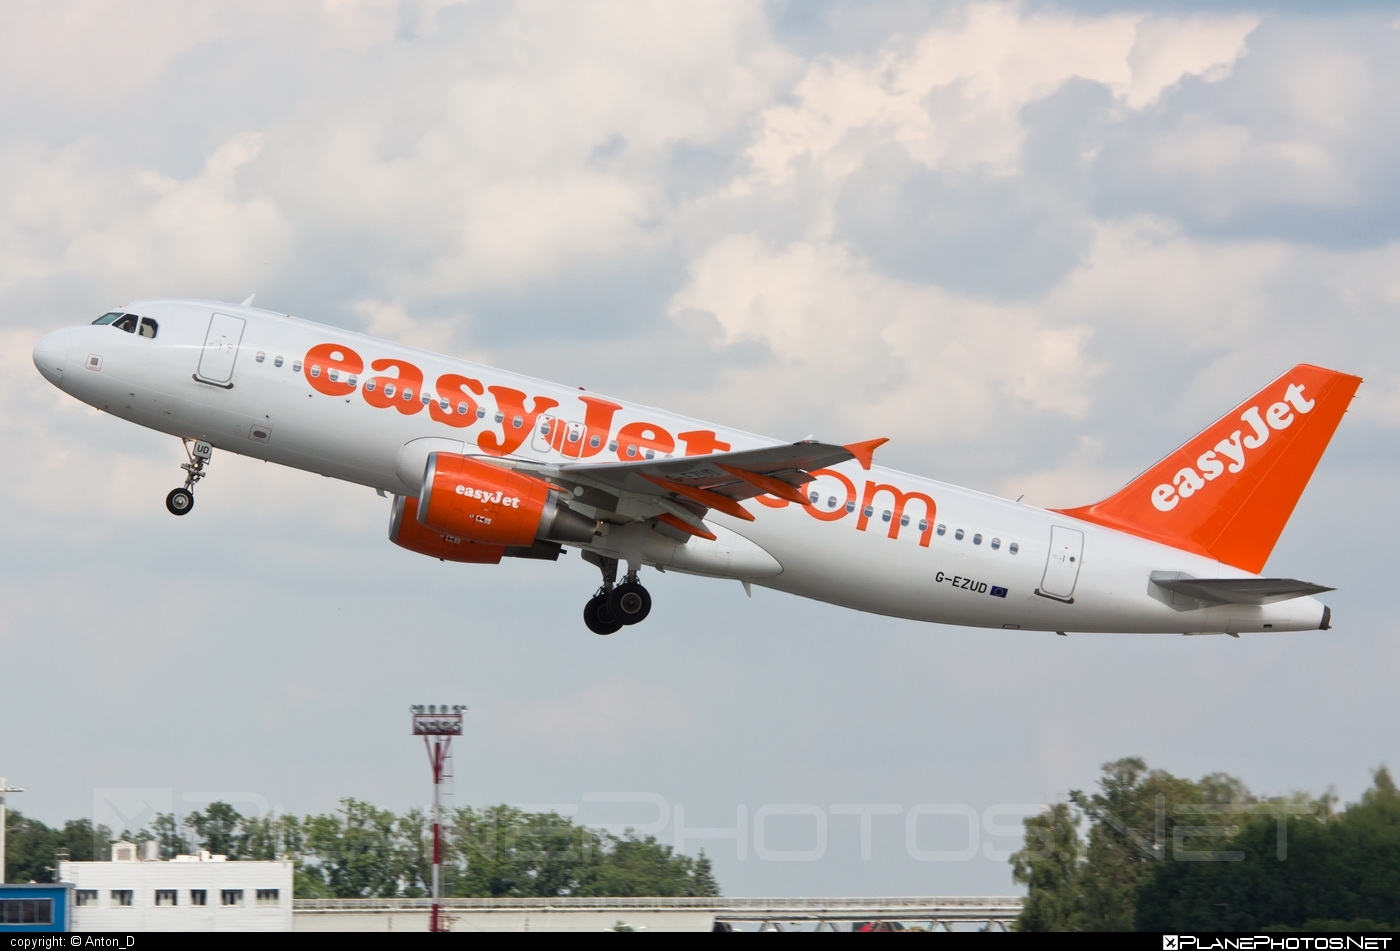 Airbus A320-214 - G-EZUD operated by easyJet #a320 #a320family #airbus #airbus320 #easyjet